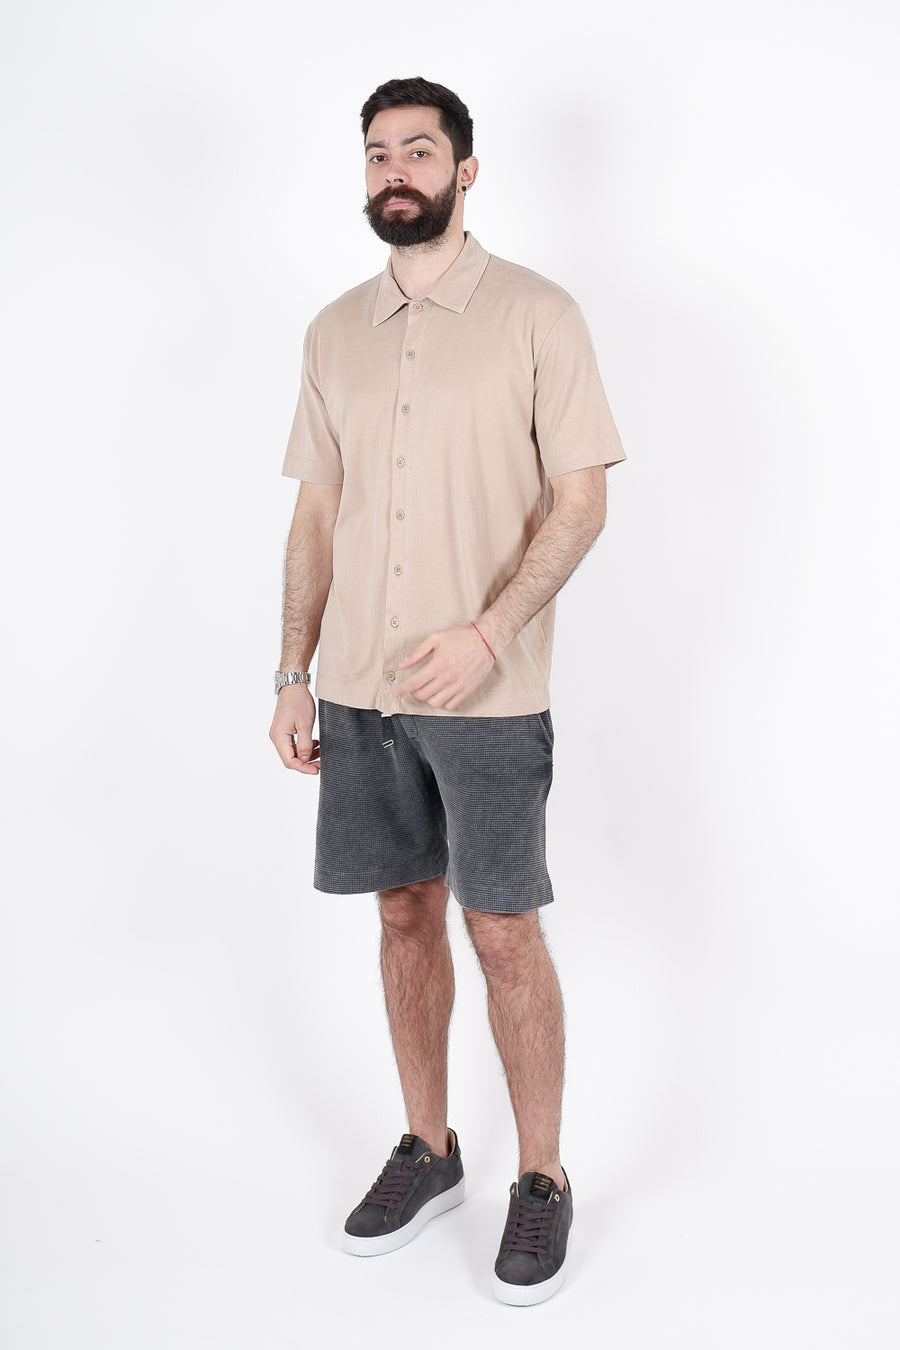 Buy the Daniele Fiesoli Cotton/Silk S/S Shirt in Sand at Intro. Spend £50 for free UK delivery. Official stockists. We ship worldwide.